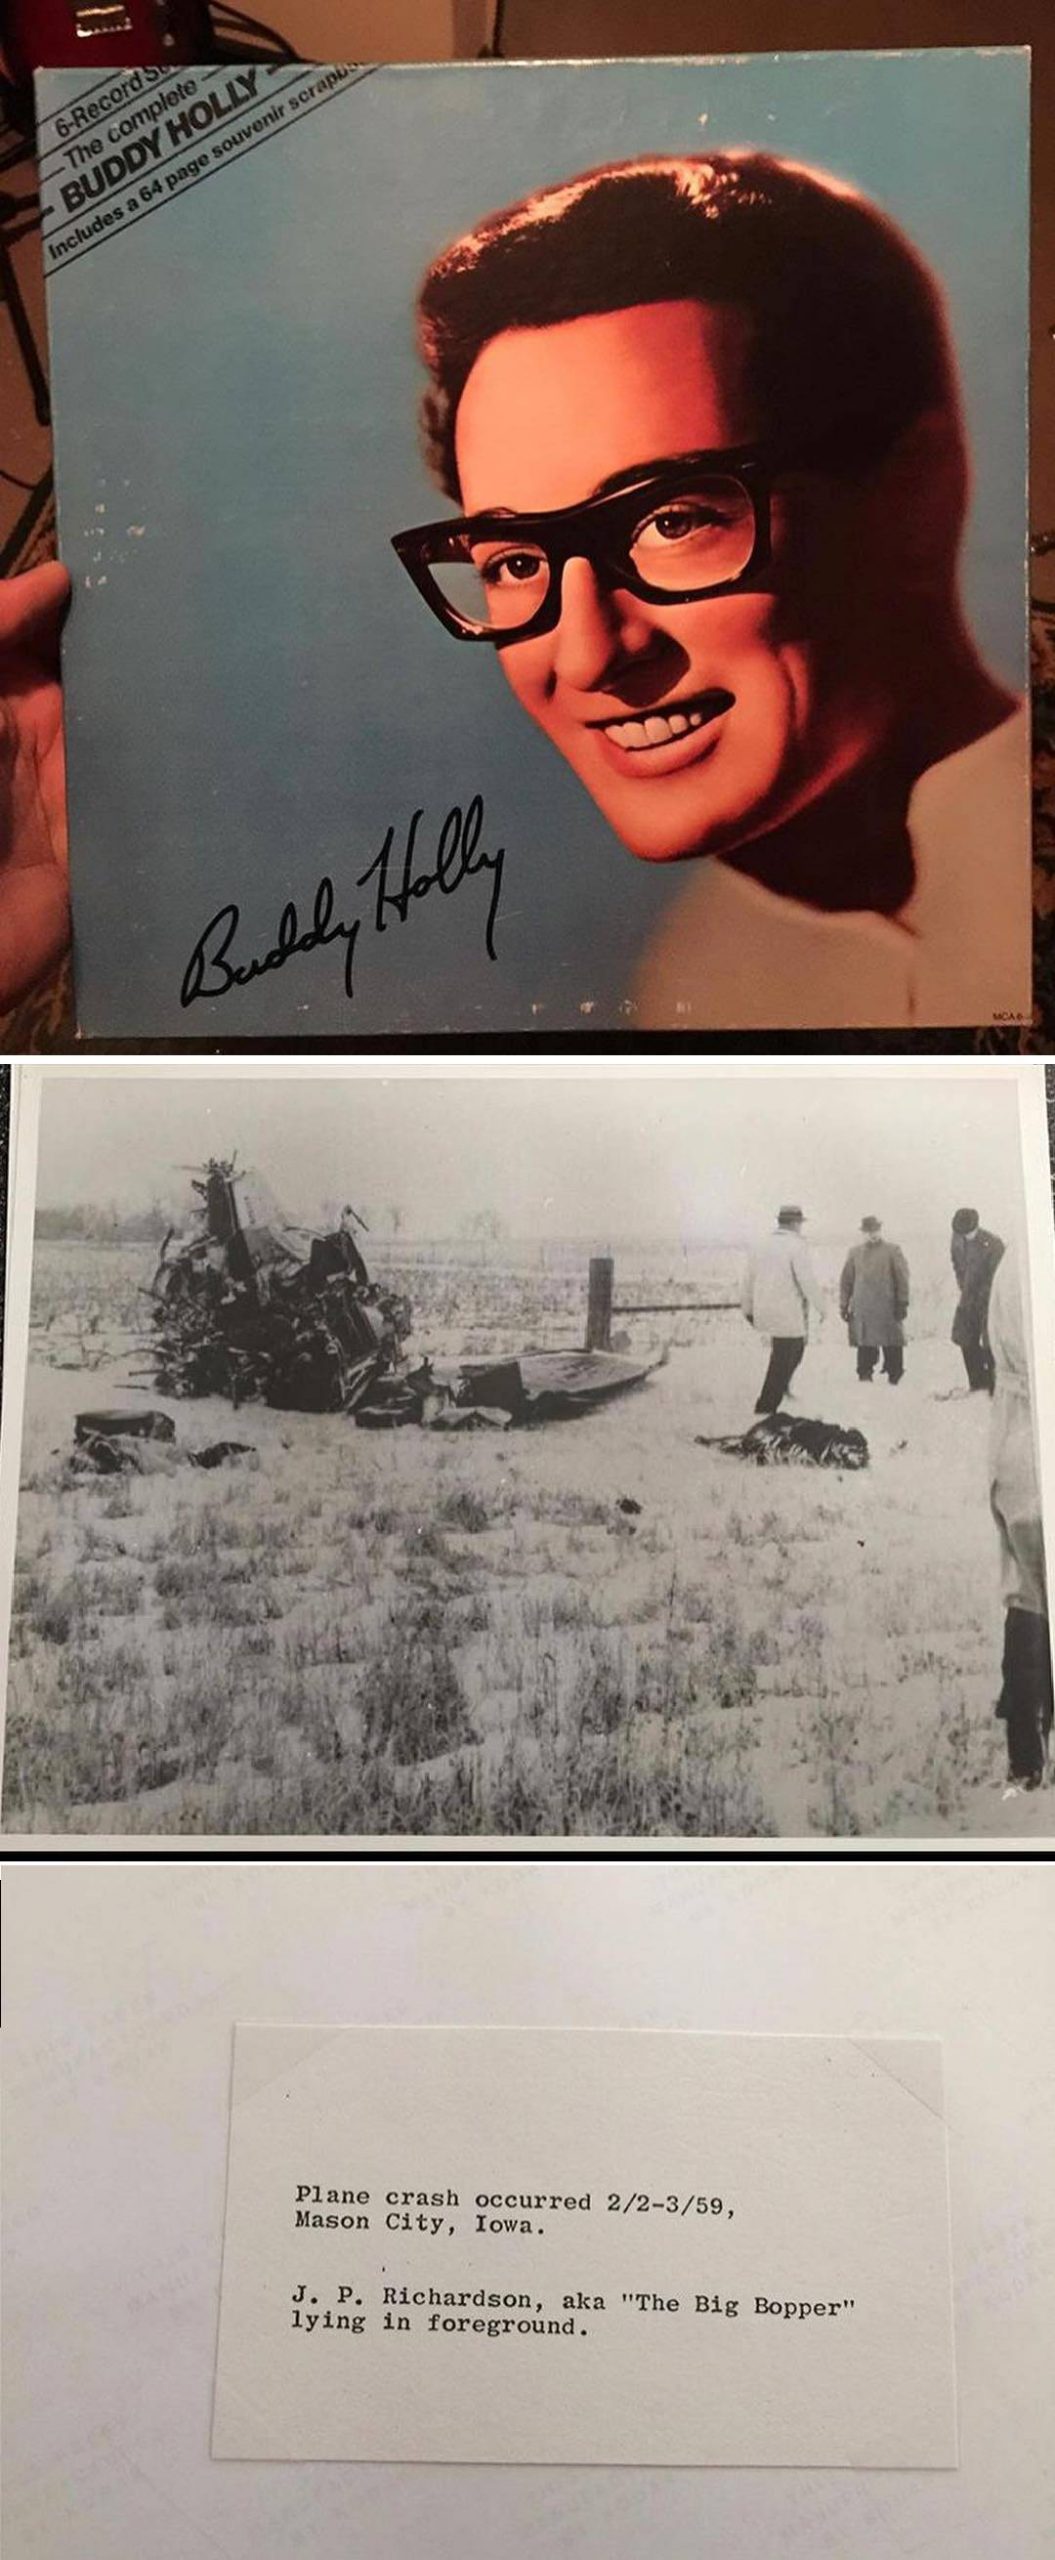 The Day The Music Died: photos from the infamous plane crash with descriptions typed and taped to back found inside a mailing envelope in a Buddy Holly x6 LP box set